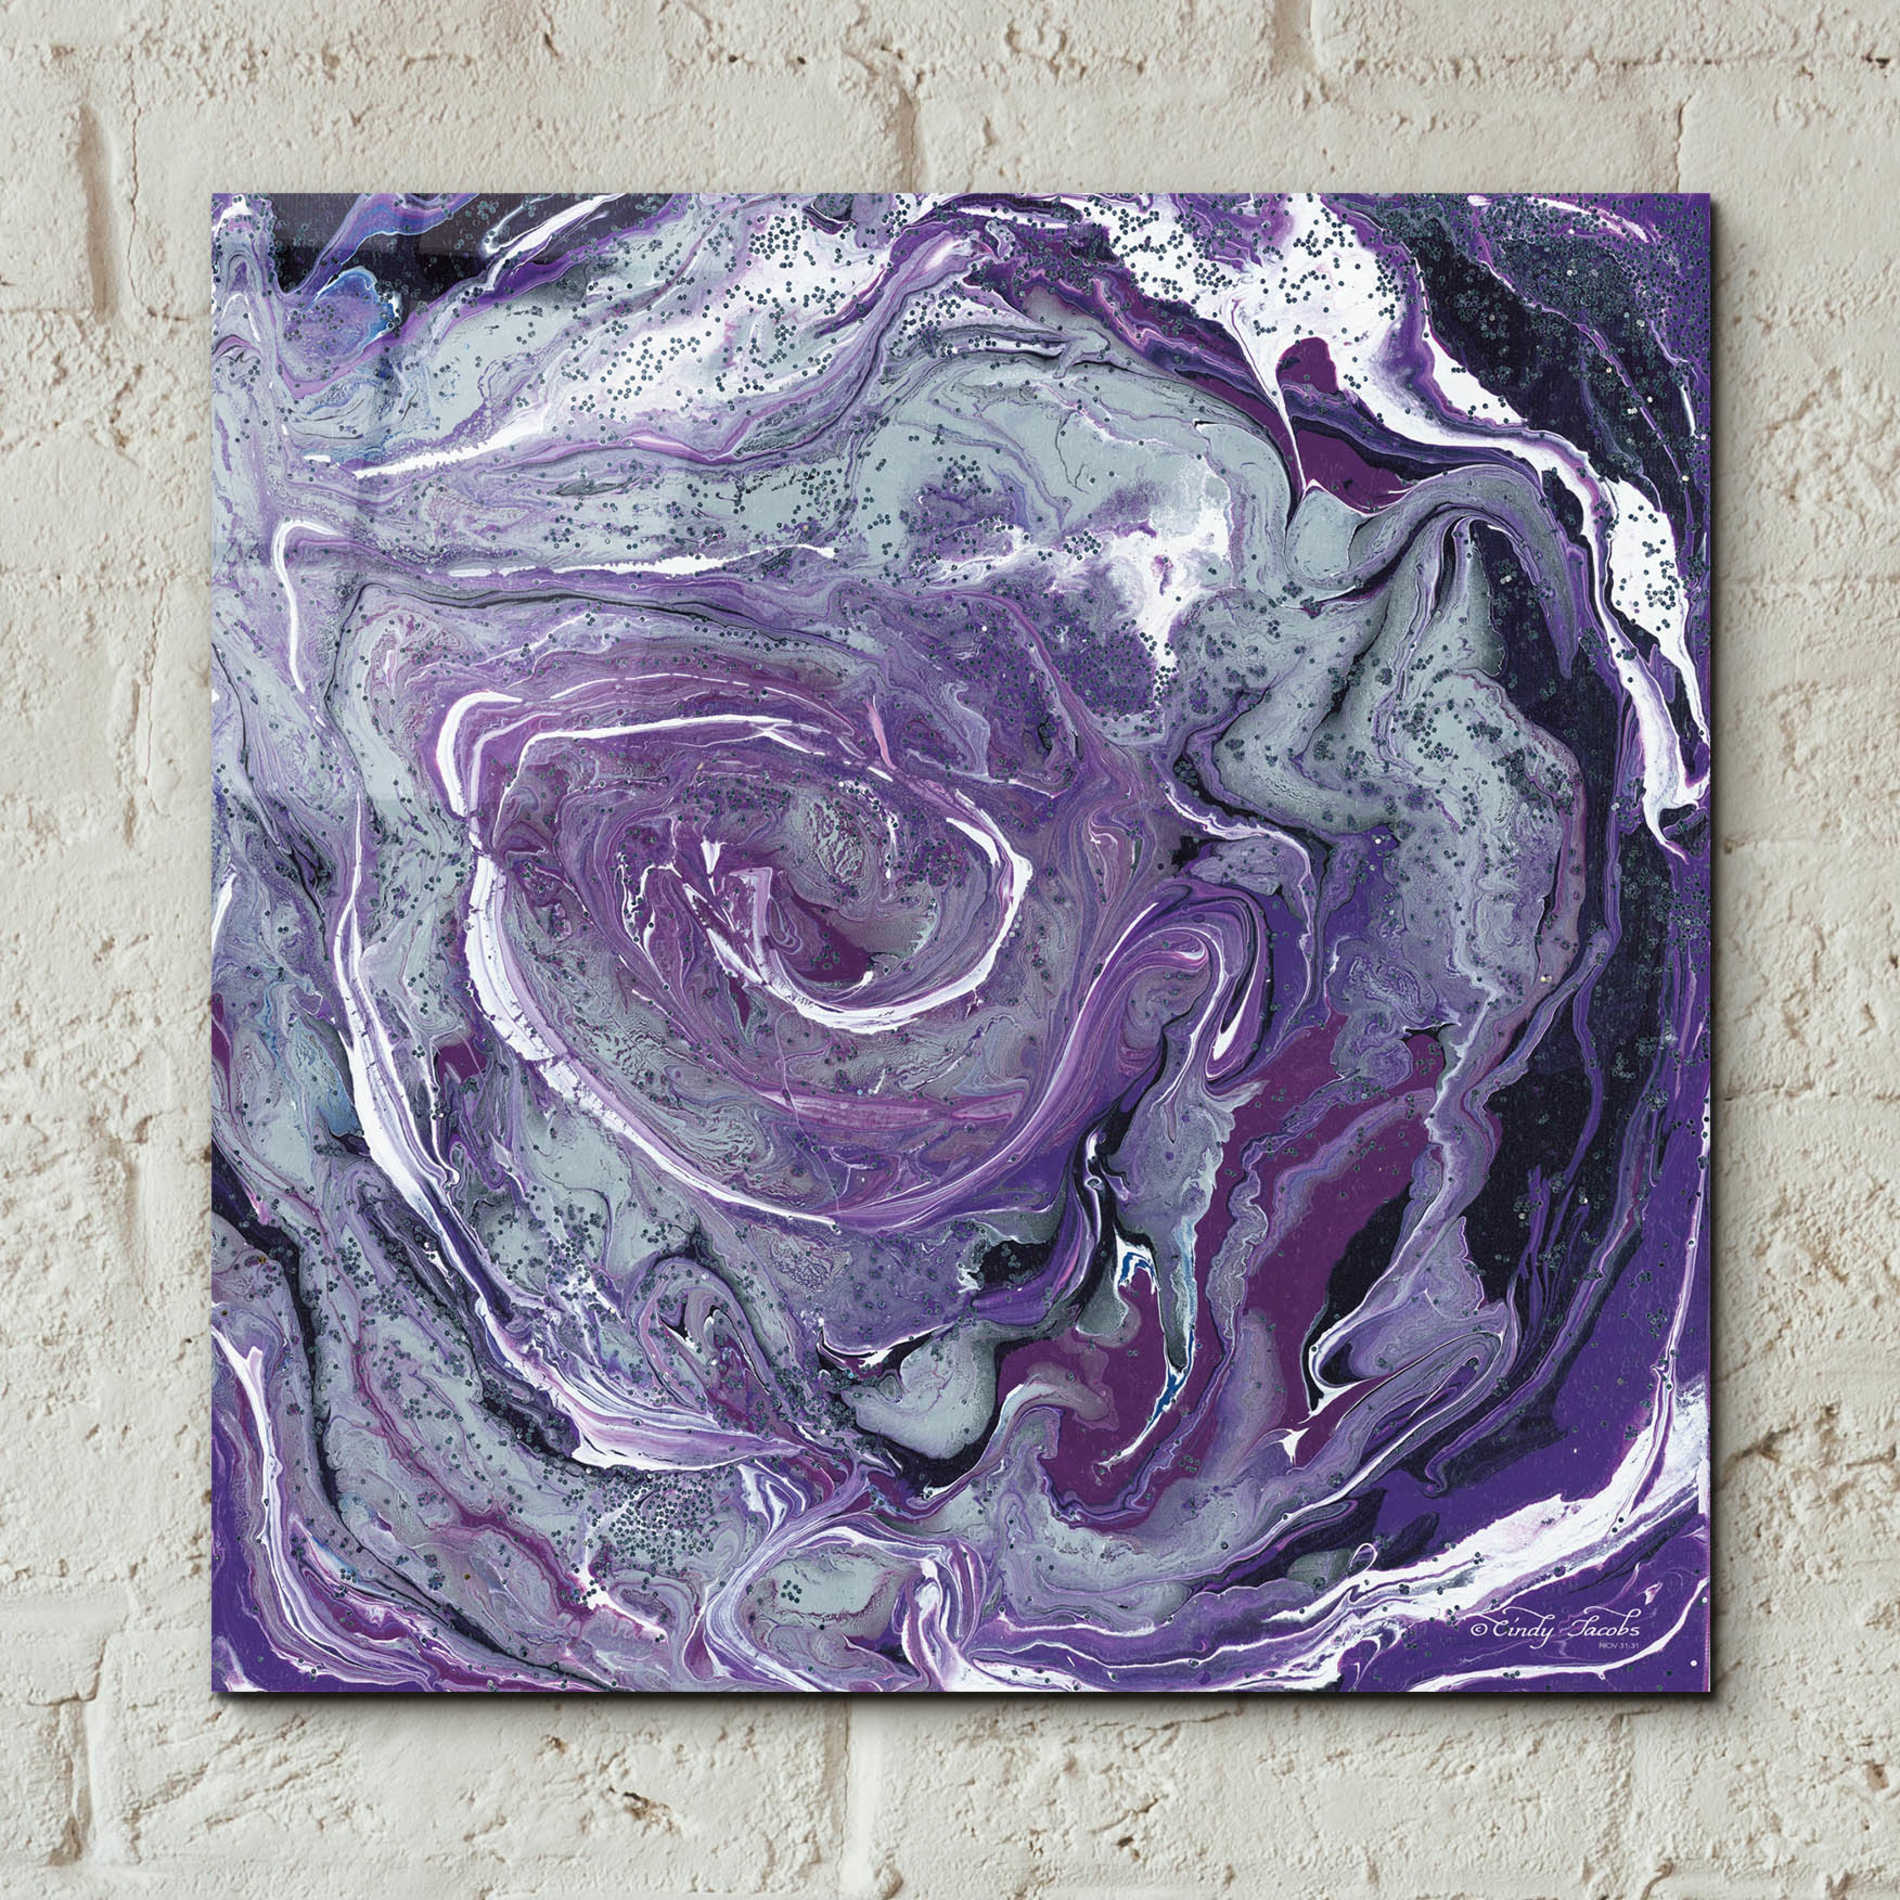 Epic Art 'Abstract in Purple II' by Cindy Jacobs, Acrylic Glass Wall Art,12x12